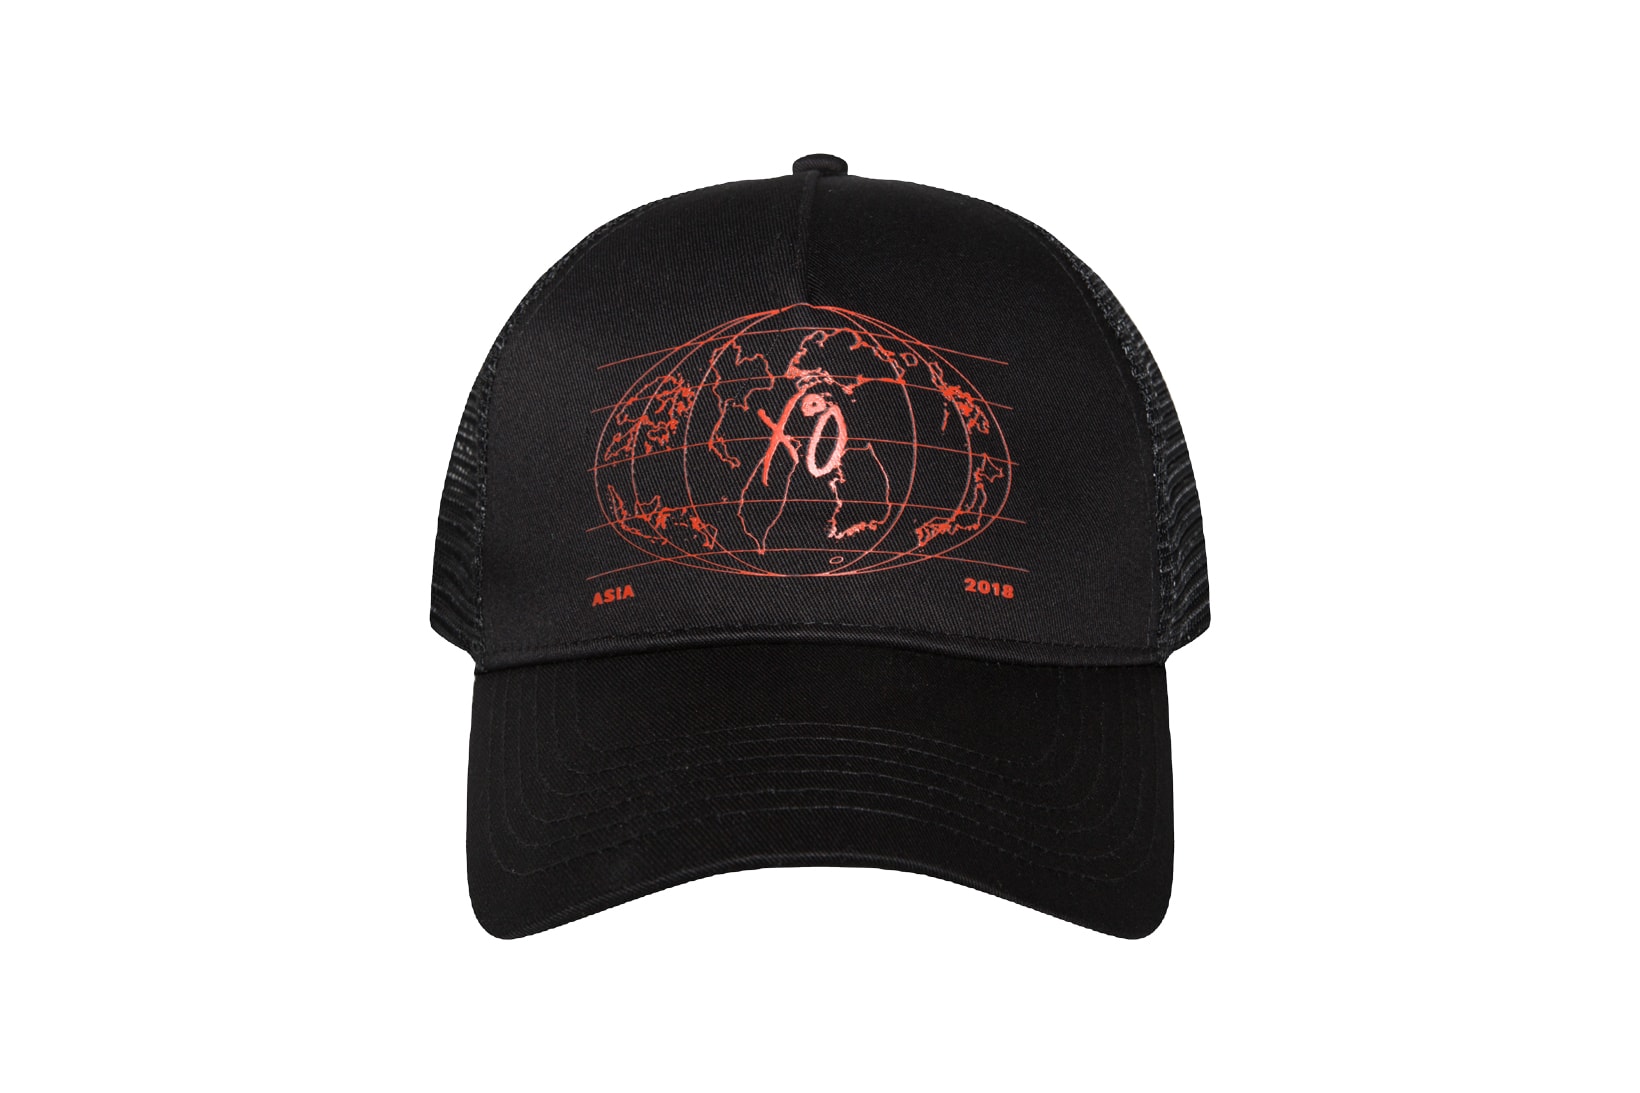 The weeknd merch LIMITED